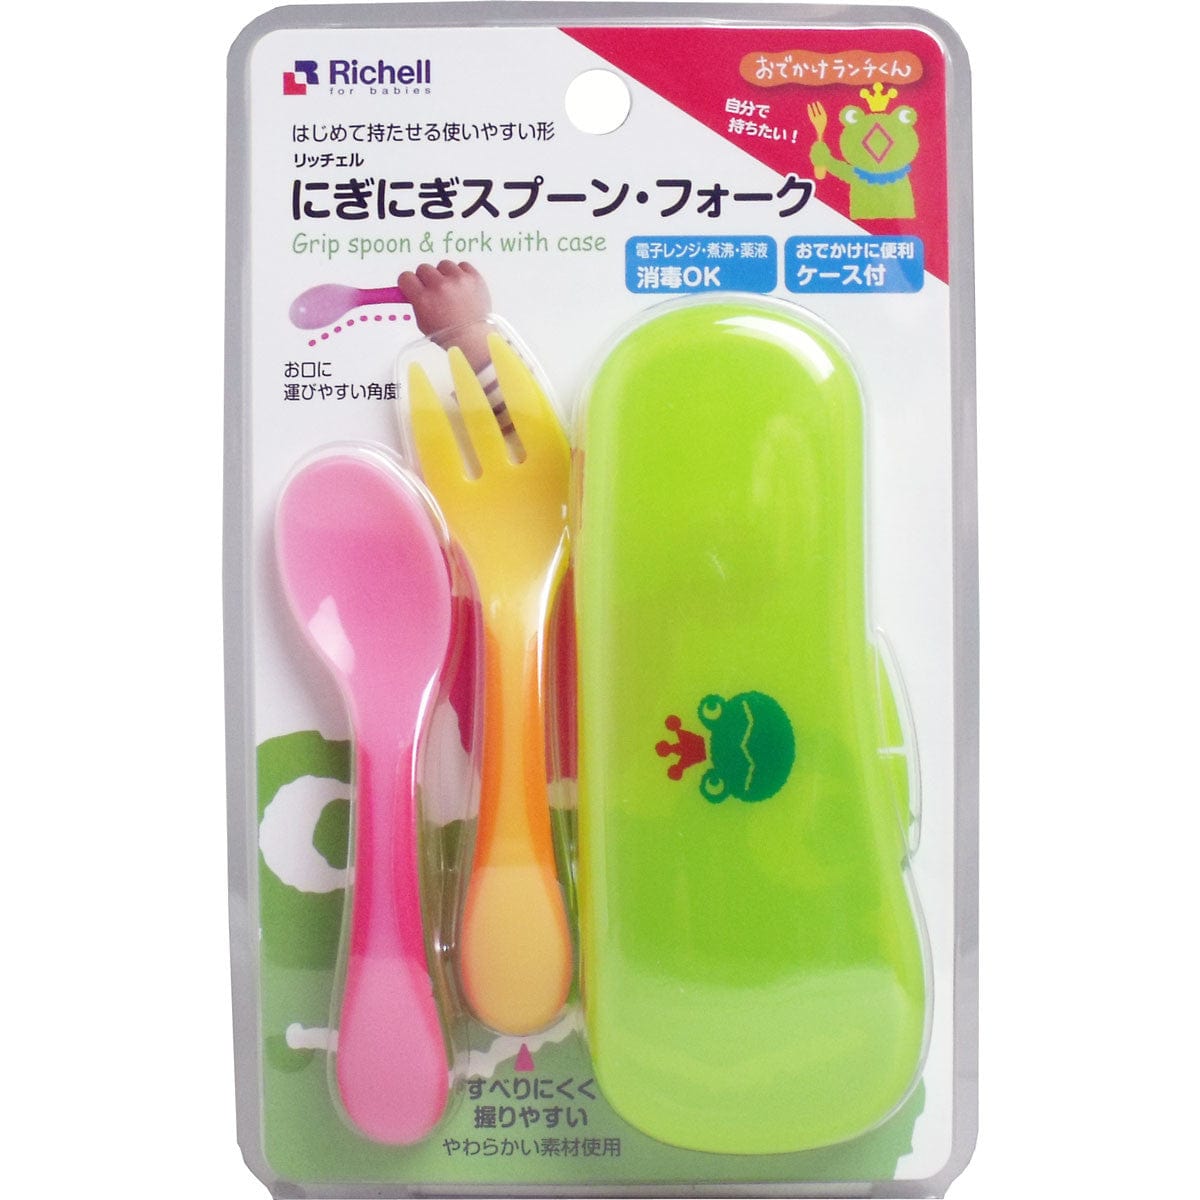 Richell - Odekake Nigi Nigi Easy Grip Baby Spoon and Fork with Storage Case -  Baby Spoon and Fork  Durio.sg